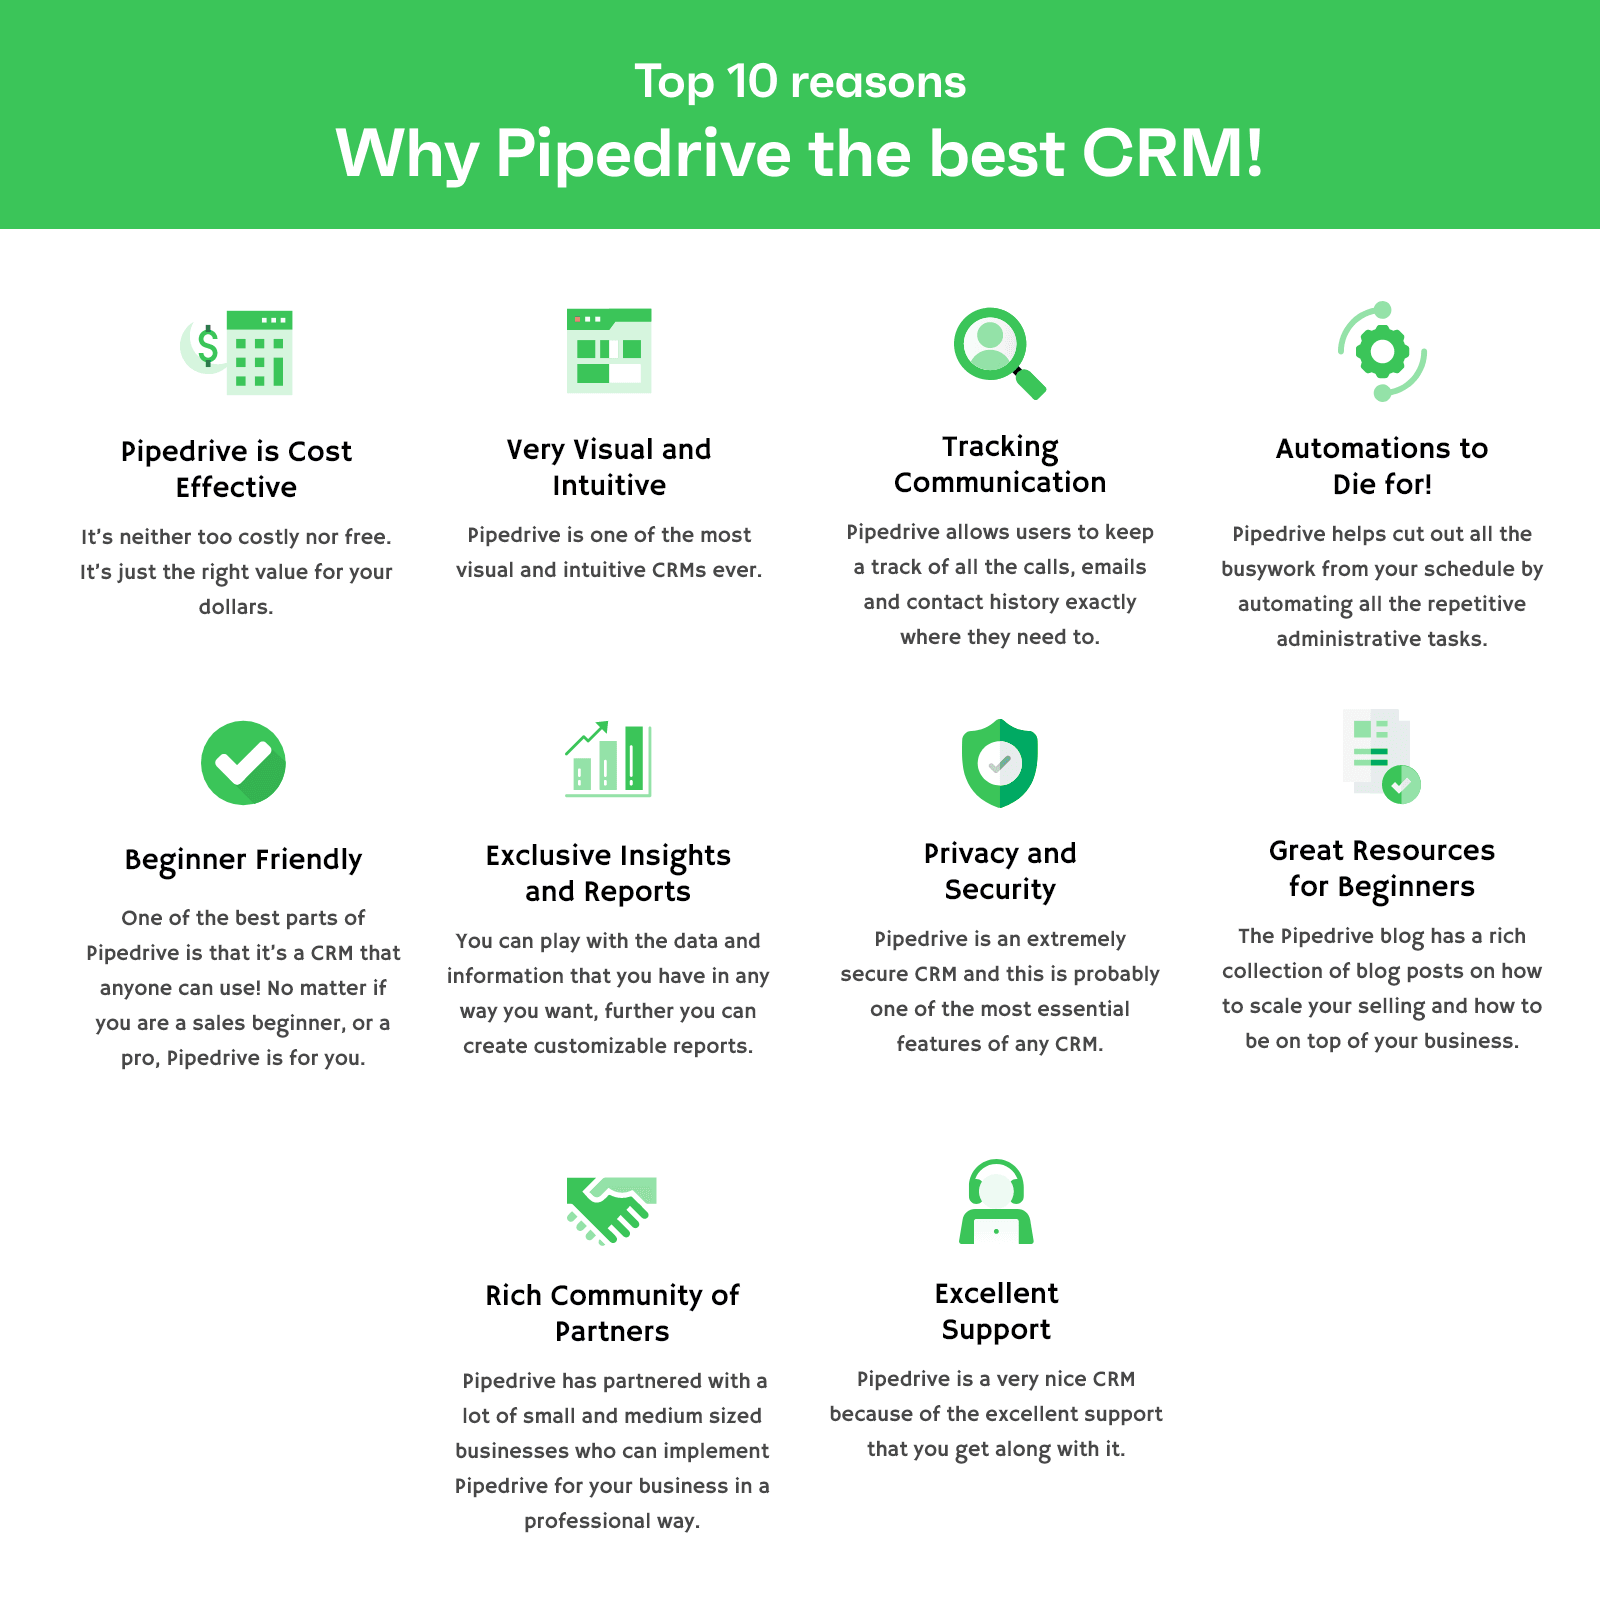 Pipedrive: Top 10 Reasons Why Pipedrive is one of the Best CRMs!